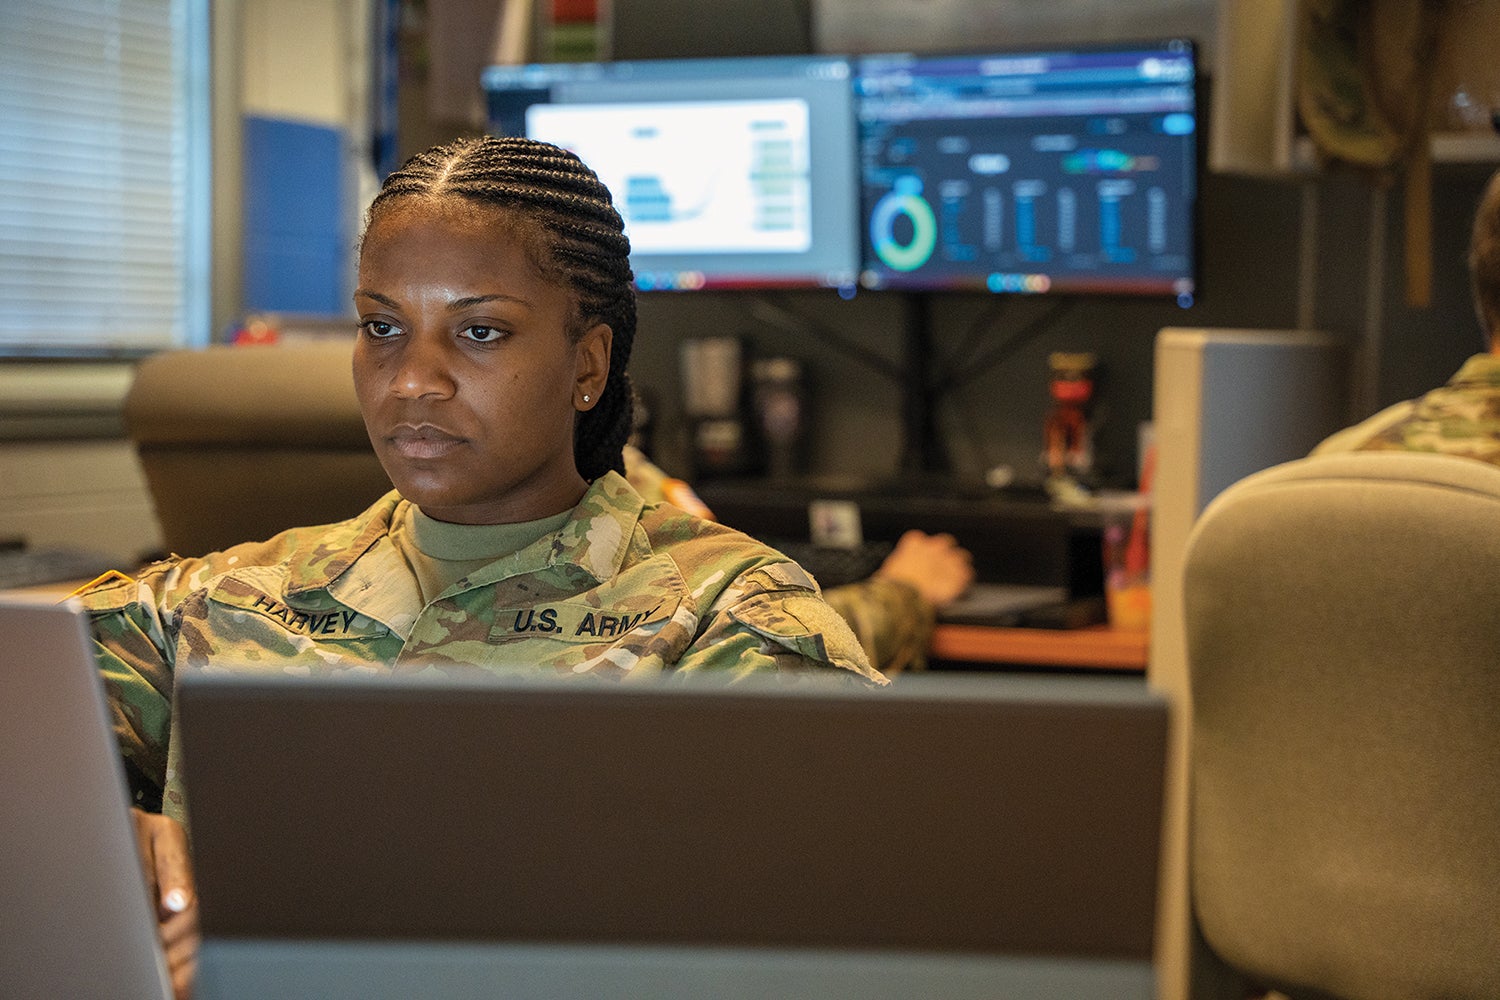 First Lt. Briana Harvey, of the Maryland Army National Guard, monitors network activity during a cyber exercise at the Laurel Readiness Center, Maryland. (Credit: Army National Guard/Sgt. Tom Lamb)